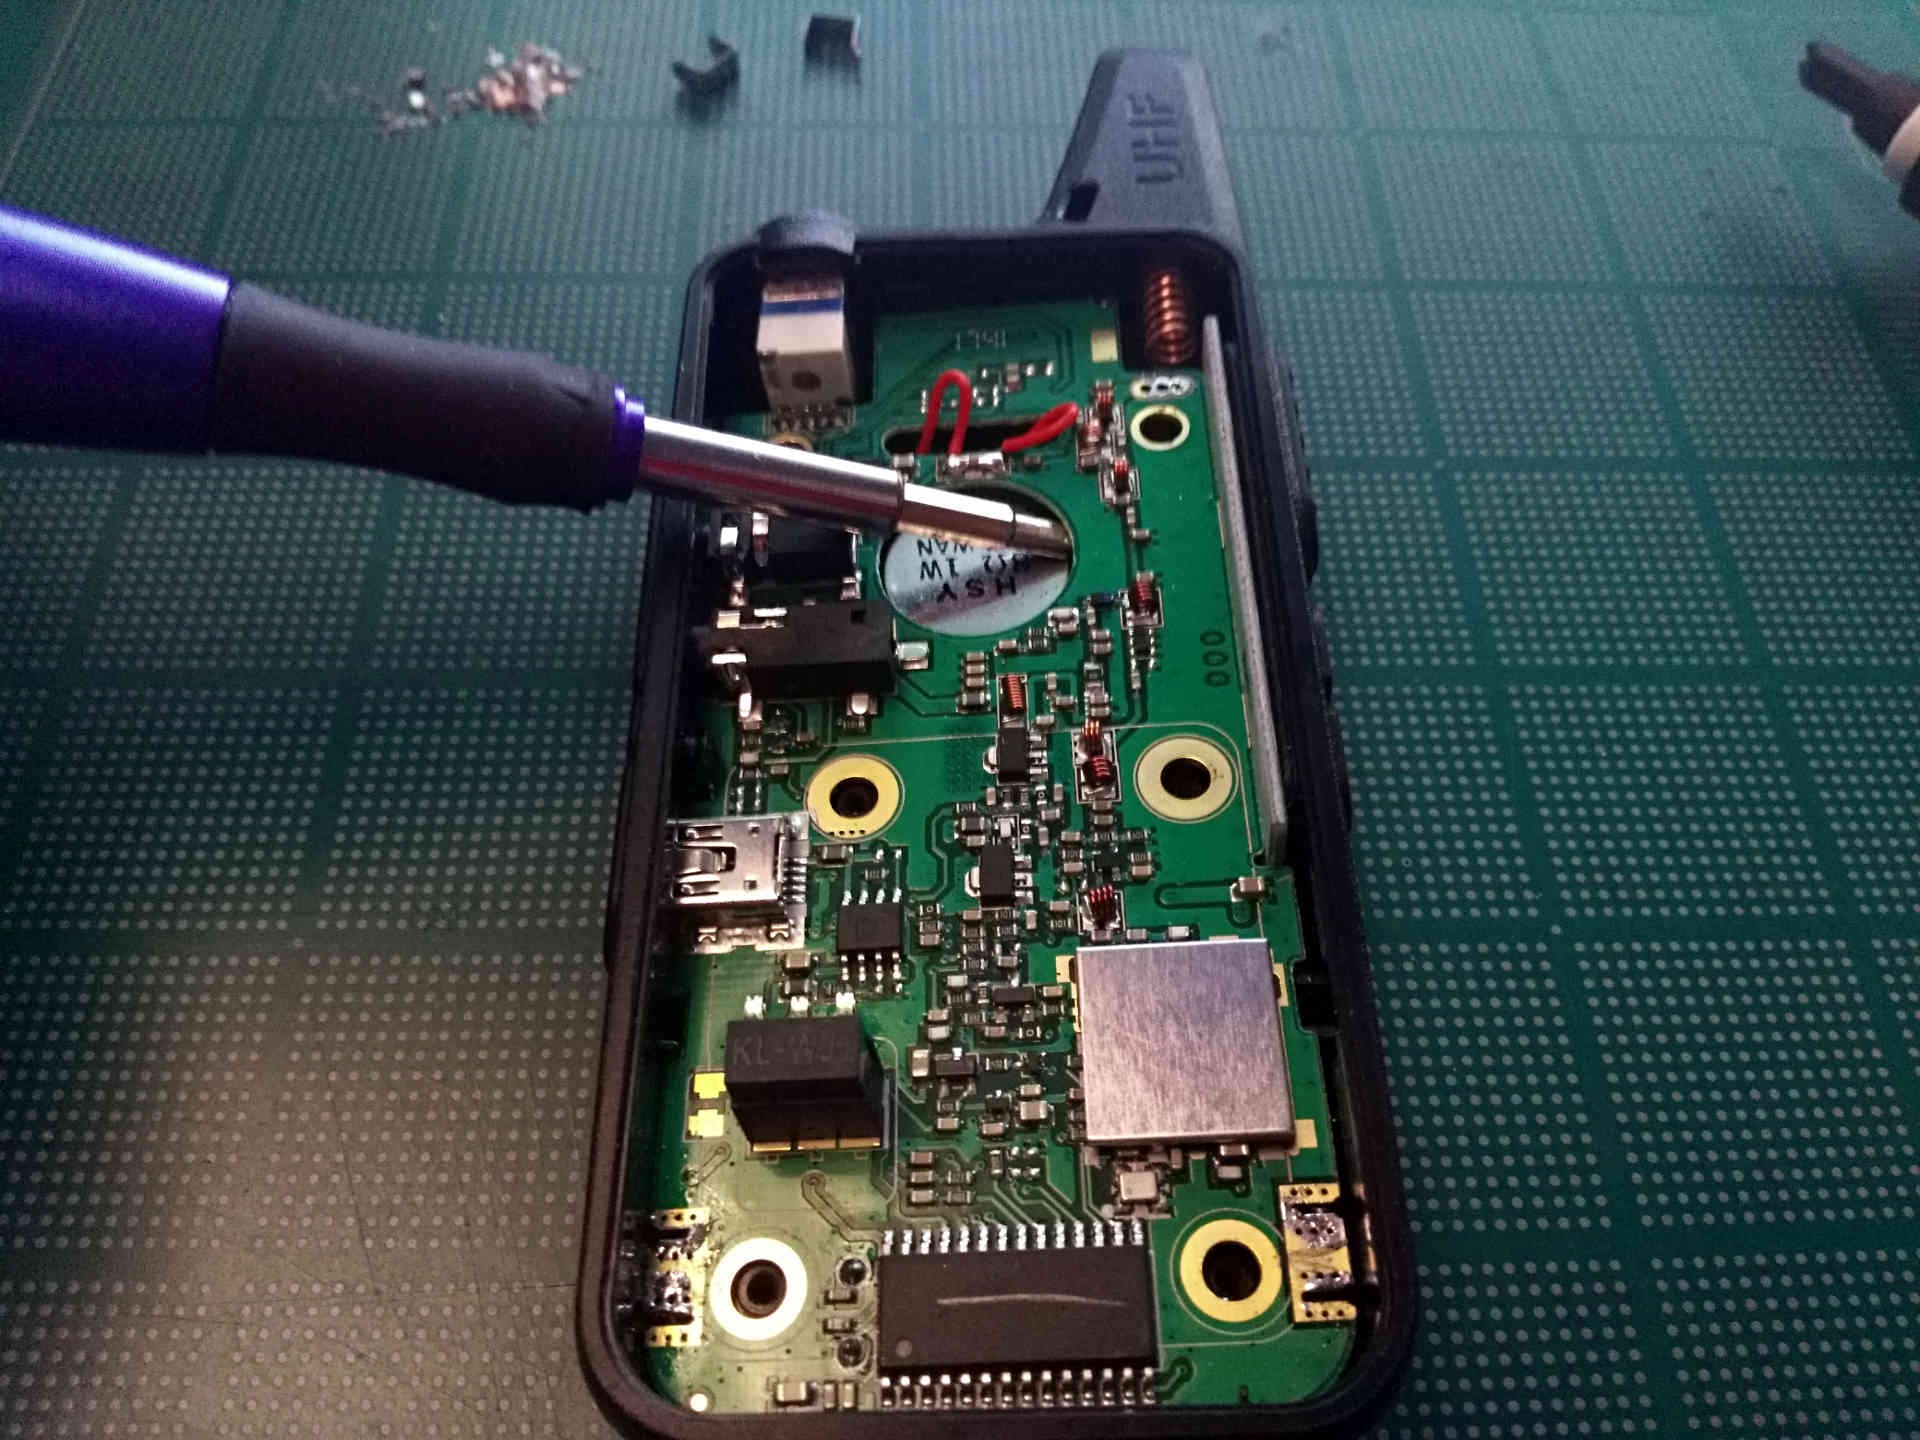 PCB pried away from casing using a screwdriver